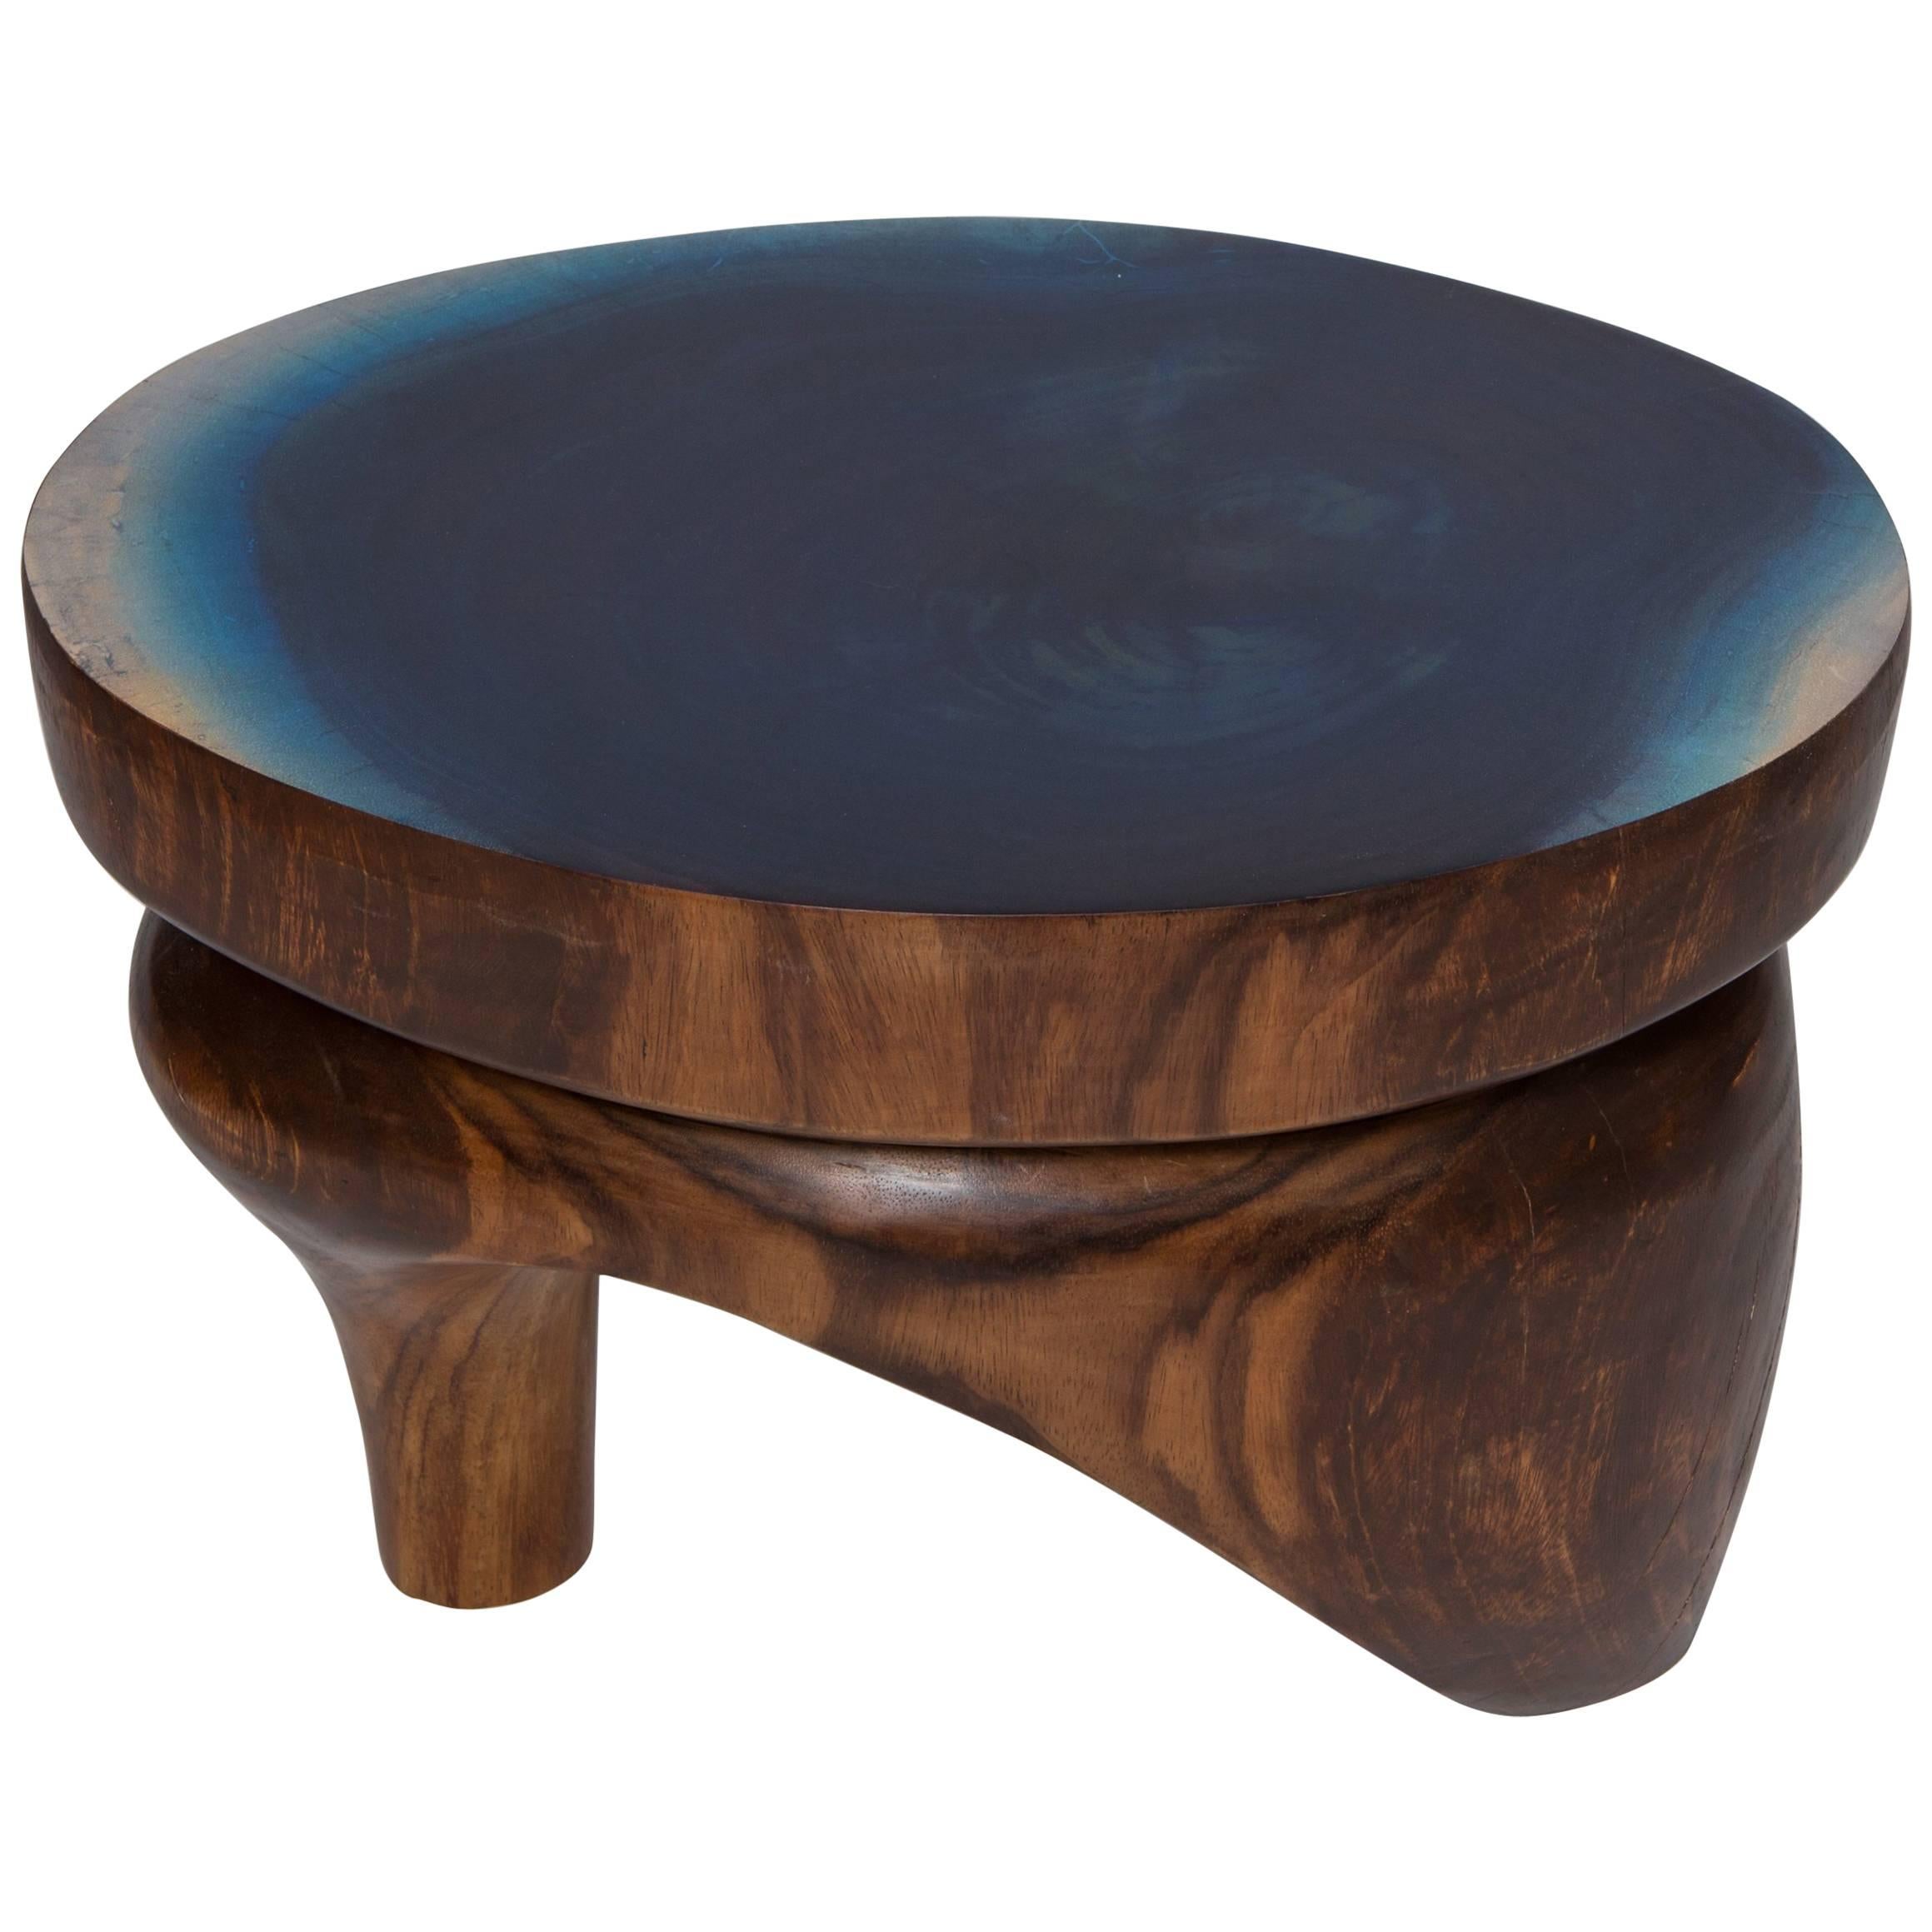 “Azulito" Table/Stool by Gabriela Valenzuela-Hirsch and Muriel Haerens For Sale